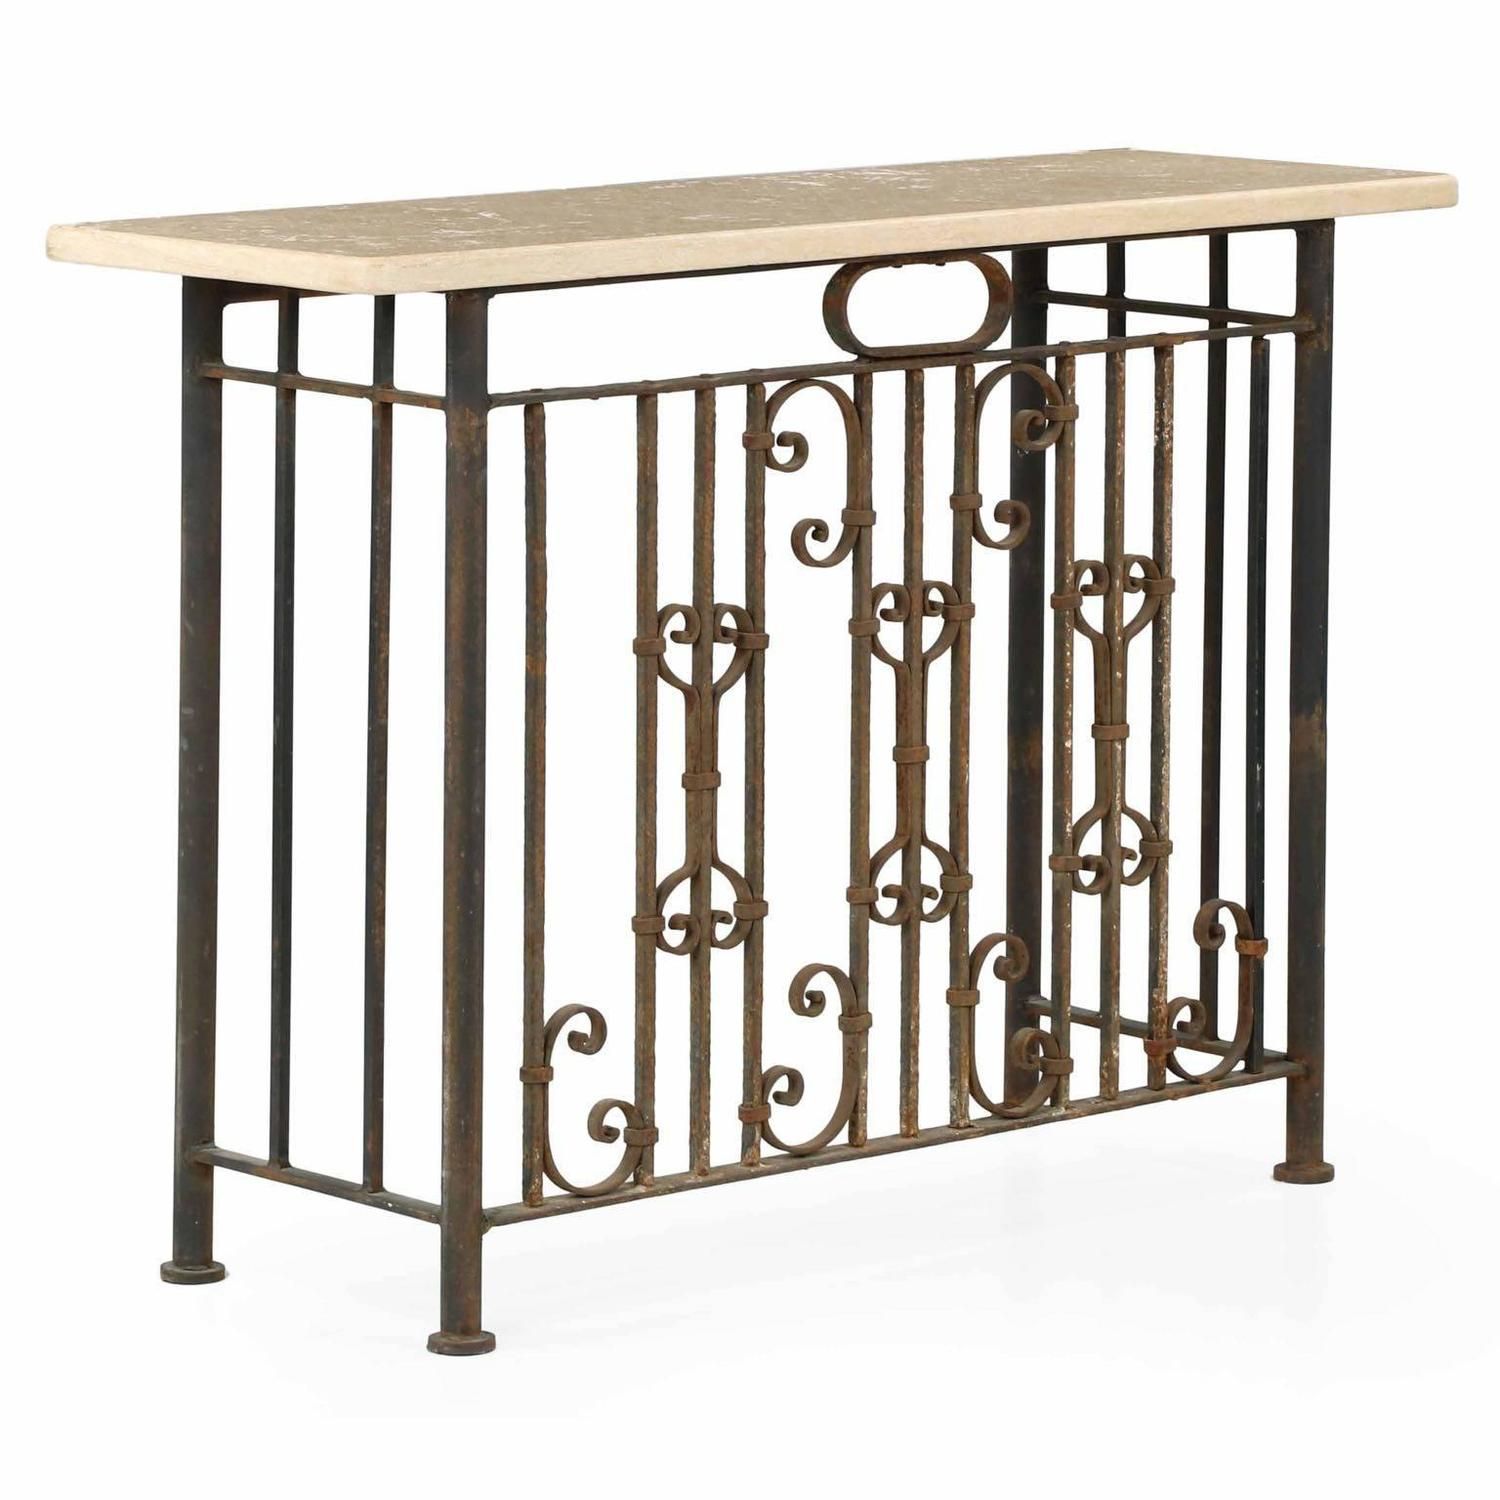 Stone Top Wrought Iron Antique Console Table, Late 19th/early 20th Pertaining To Round Iron Console Tables (View 10 of 20)